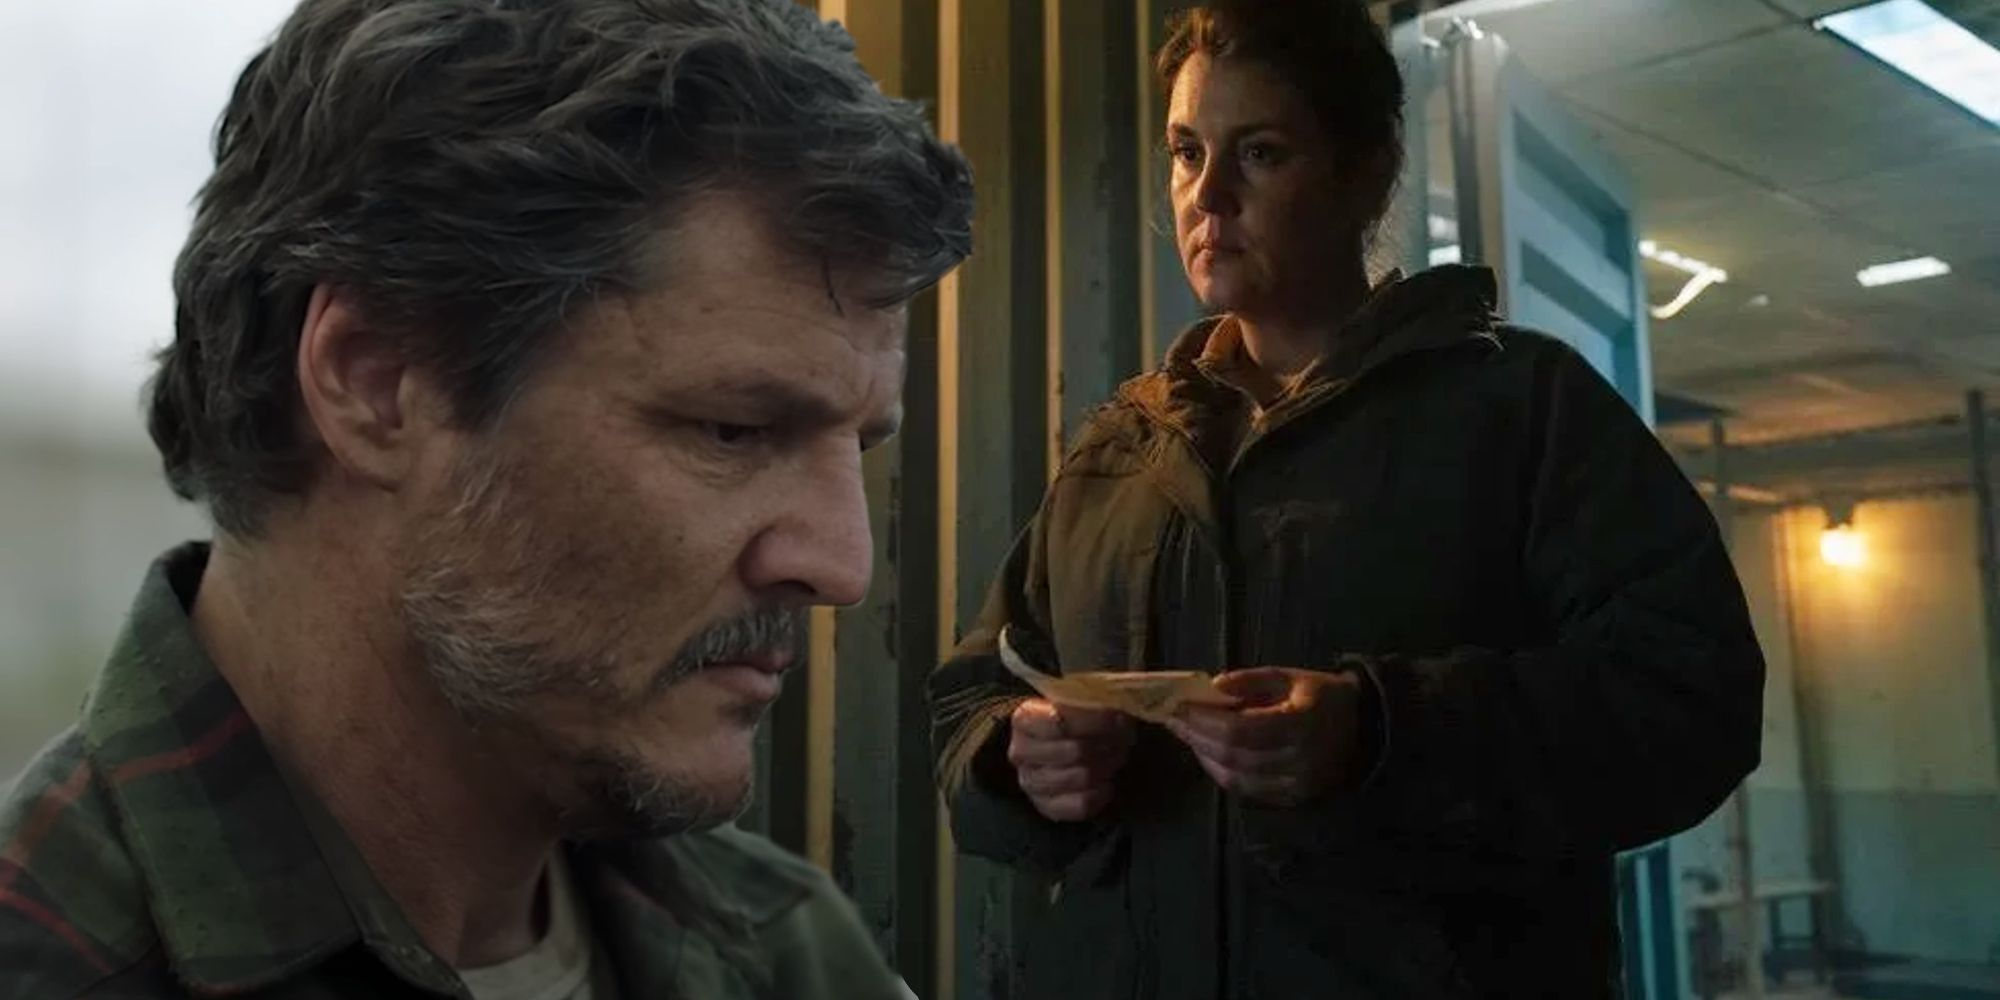 Pedro Pascal as Joel in The Last of Us and Melanie Lynskey's Kathleen holding a list in Last of Us episode 4.